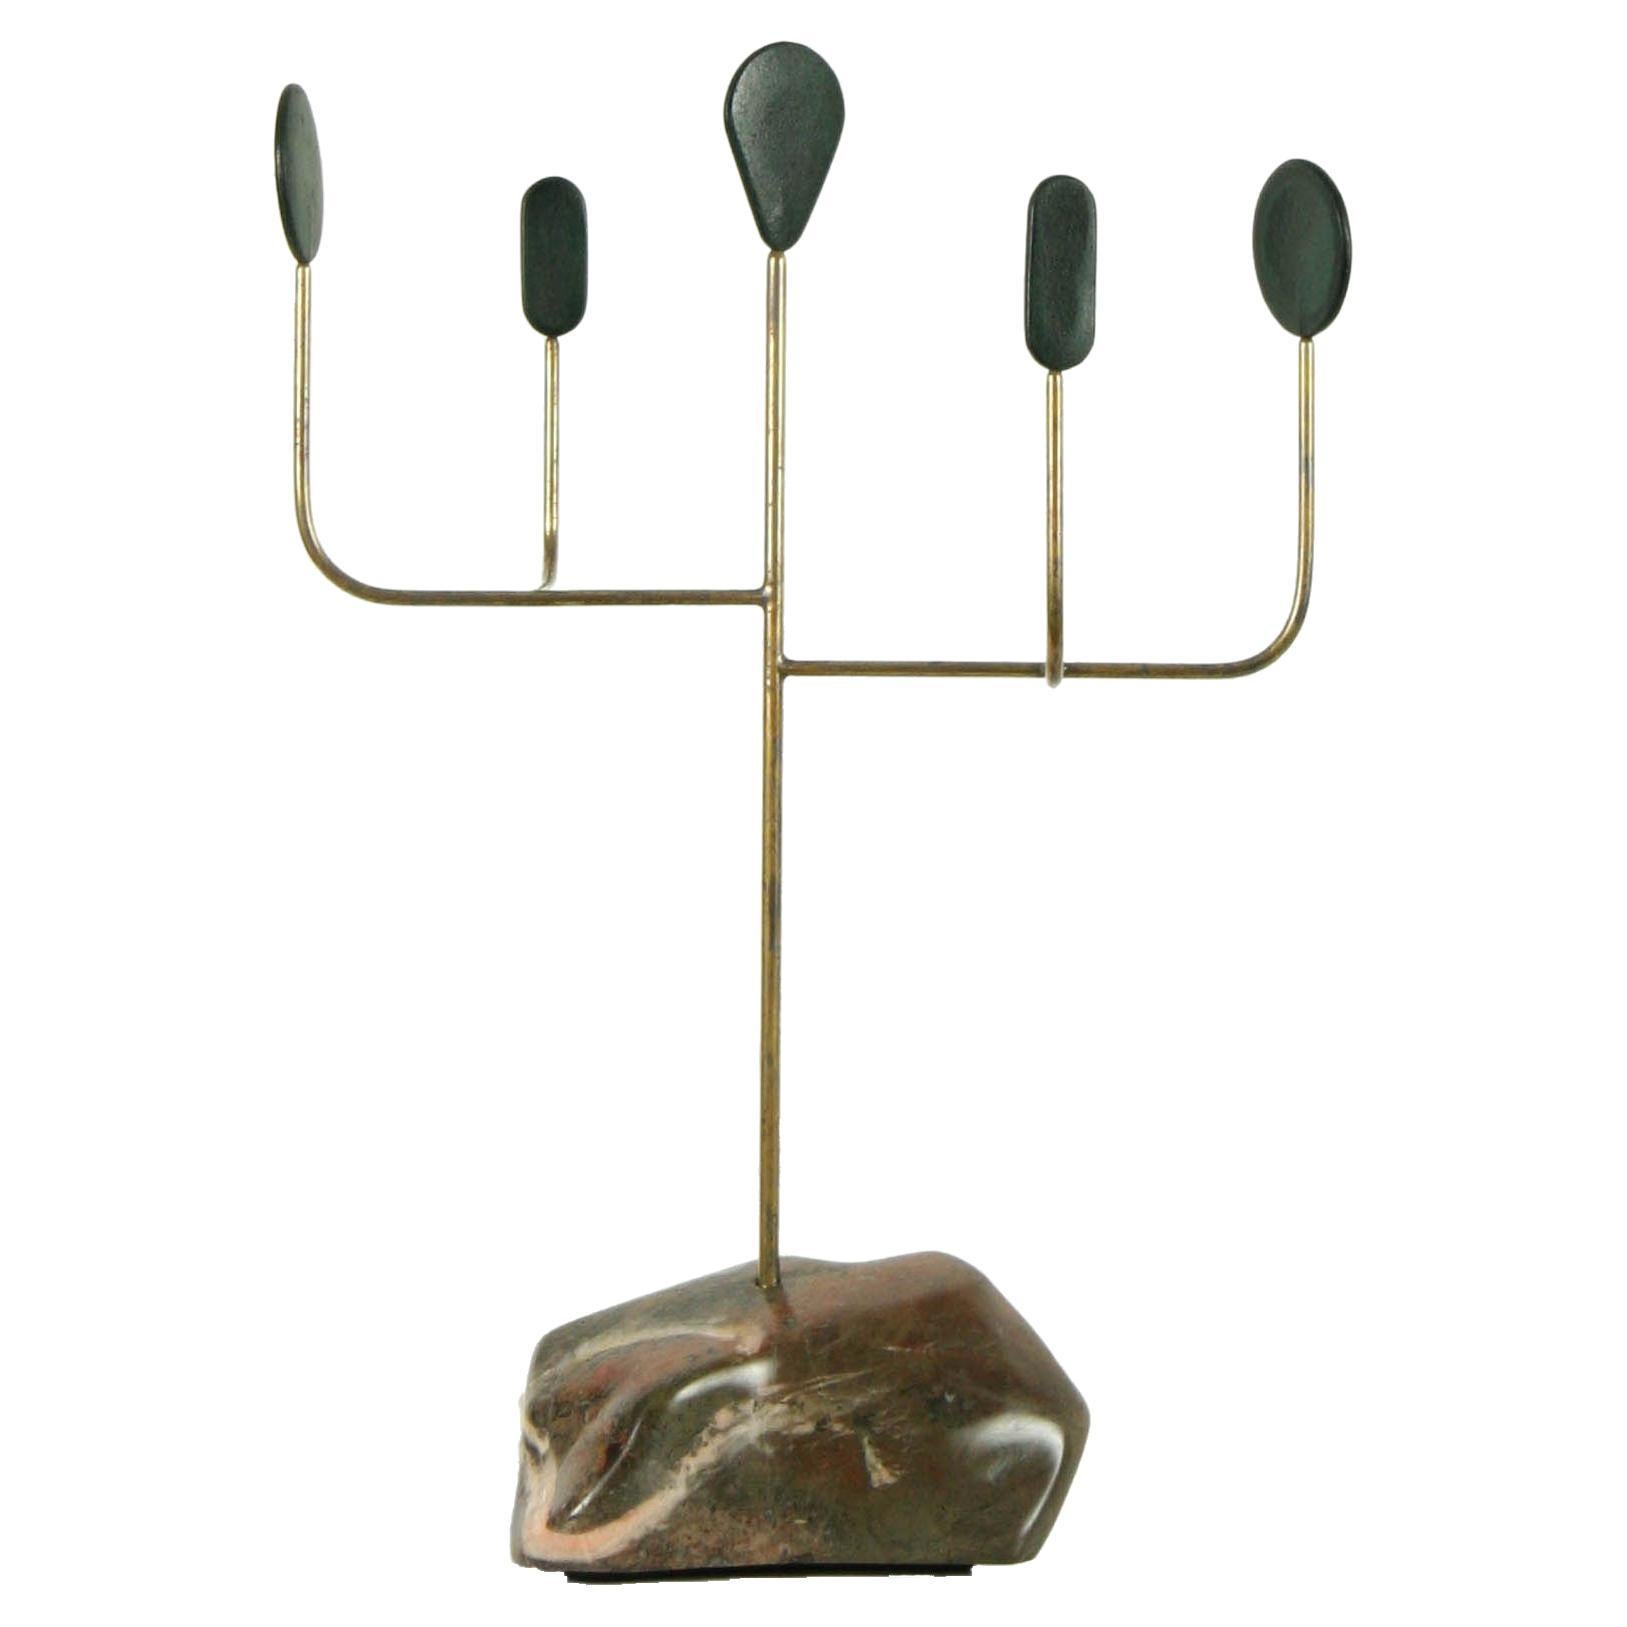 Loleka-5 Tree Sculpture of Brass, Marble and Leather For Sale